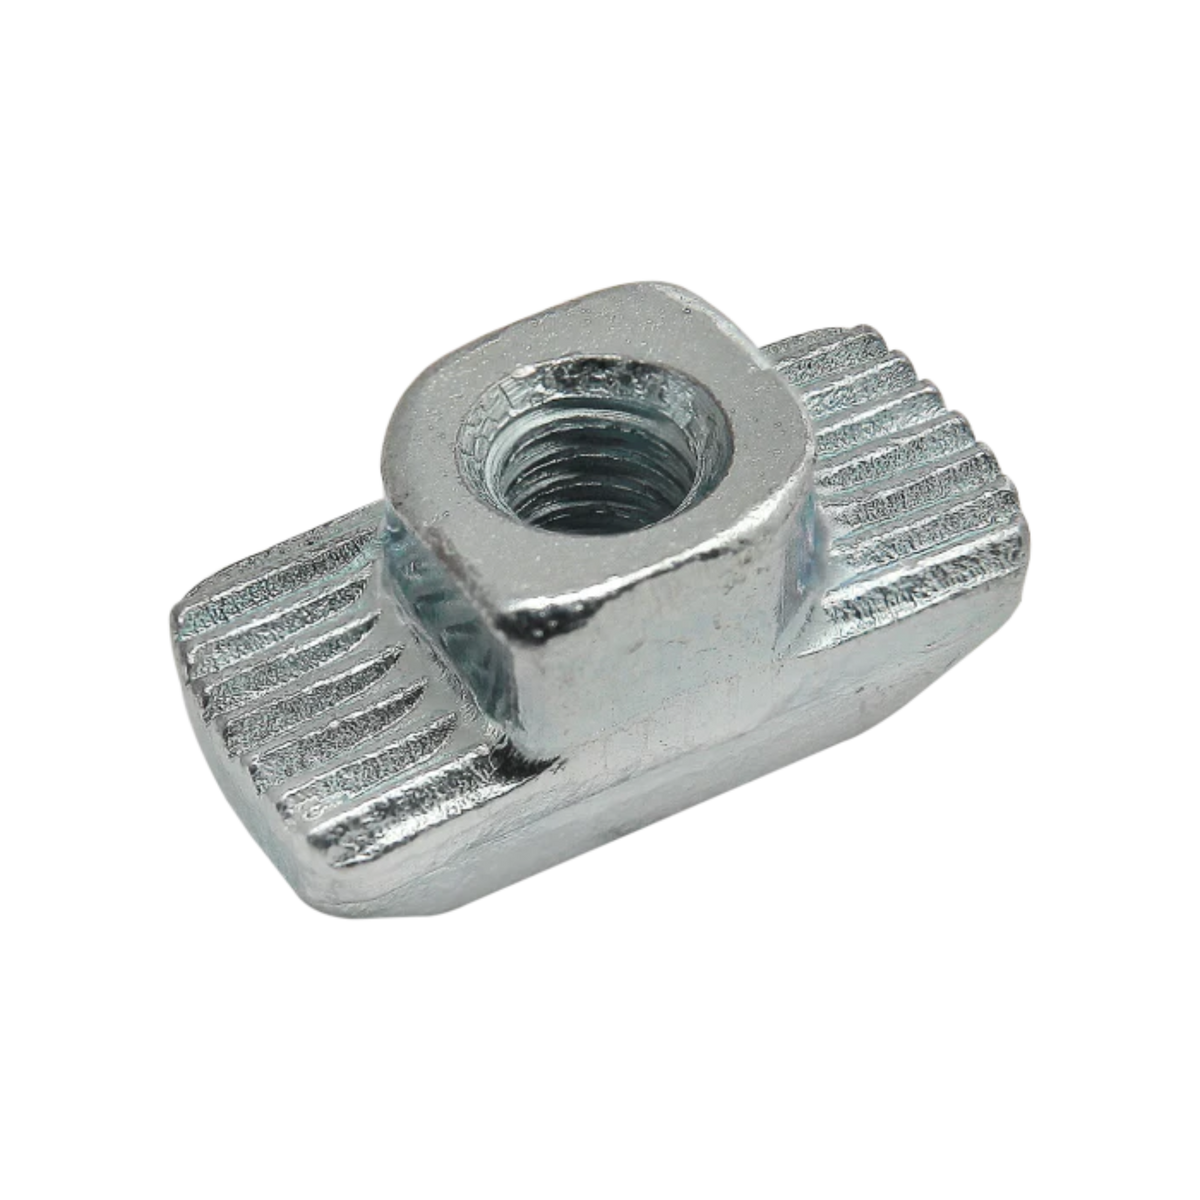 metal rectangular t-nut with threaded port in the center and grooves on the sides